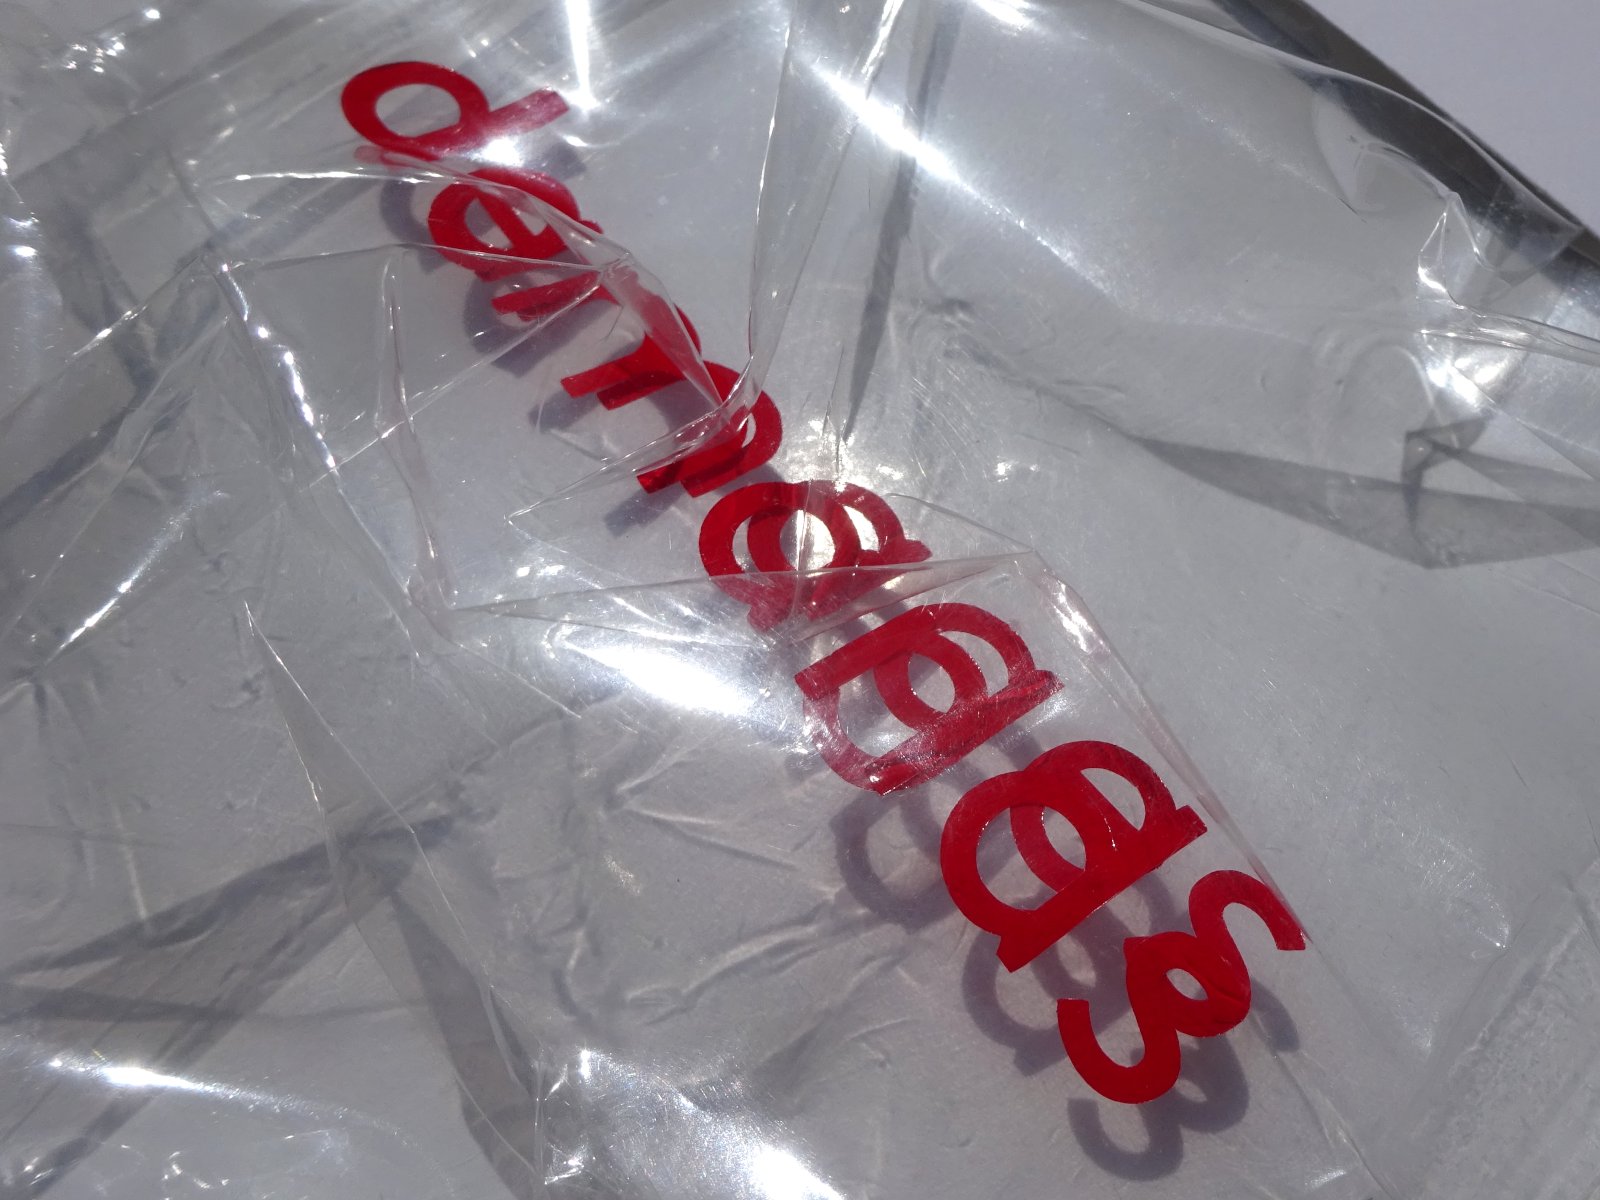 Close-up view. Plastic wrapping is reflecting light. Focus on the letters.